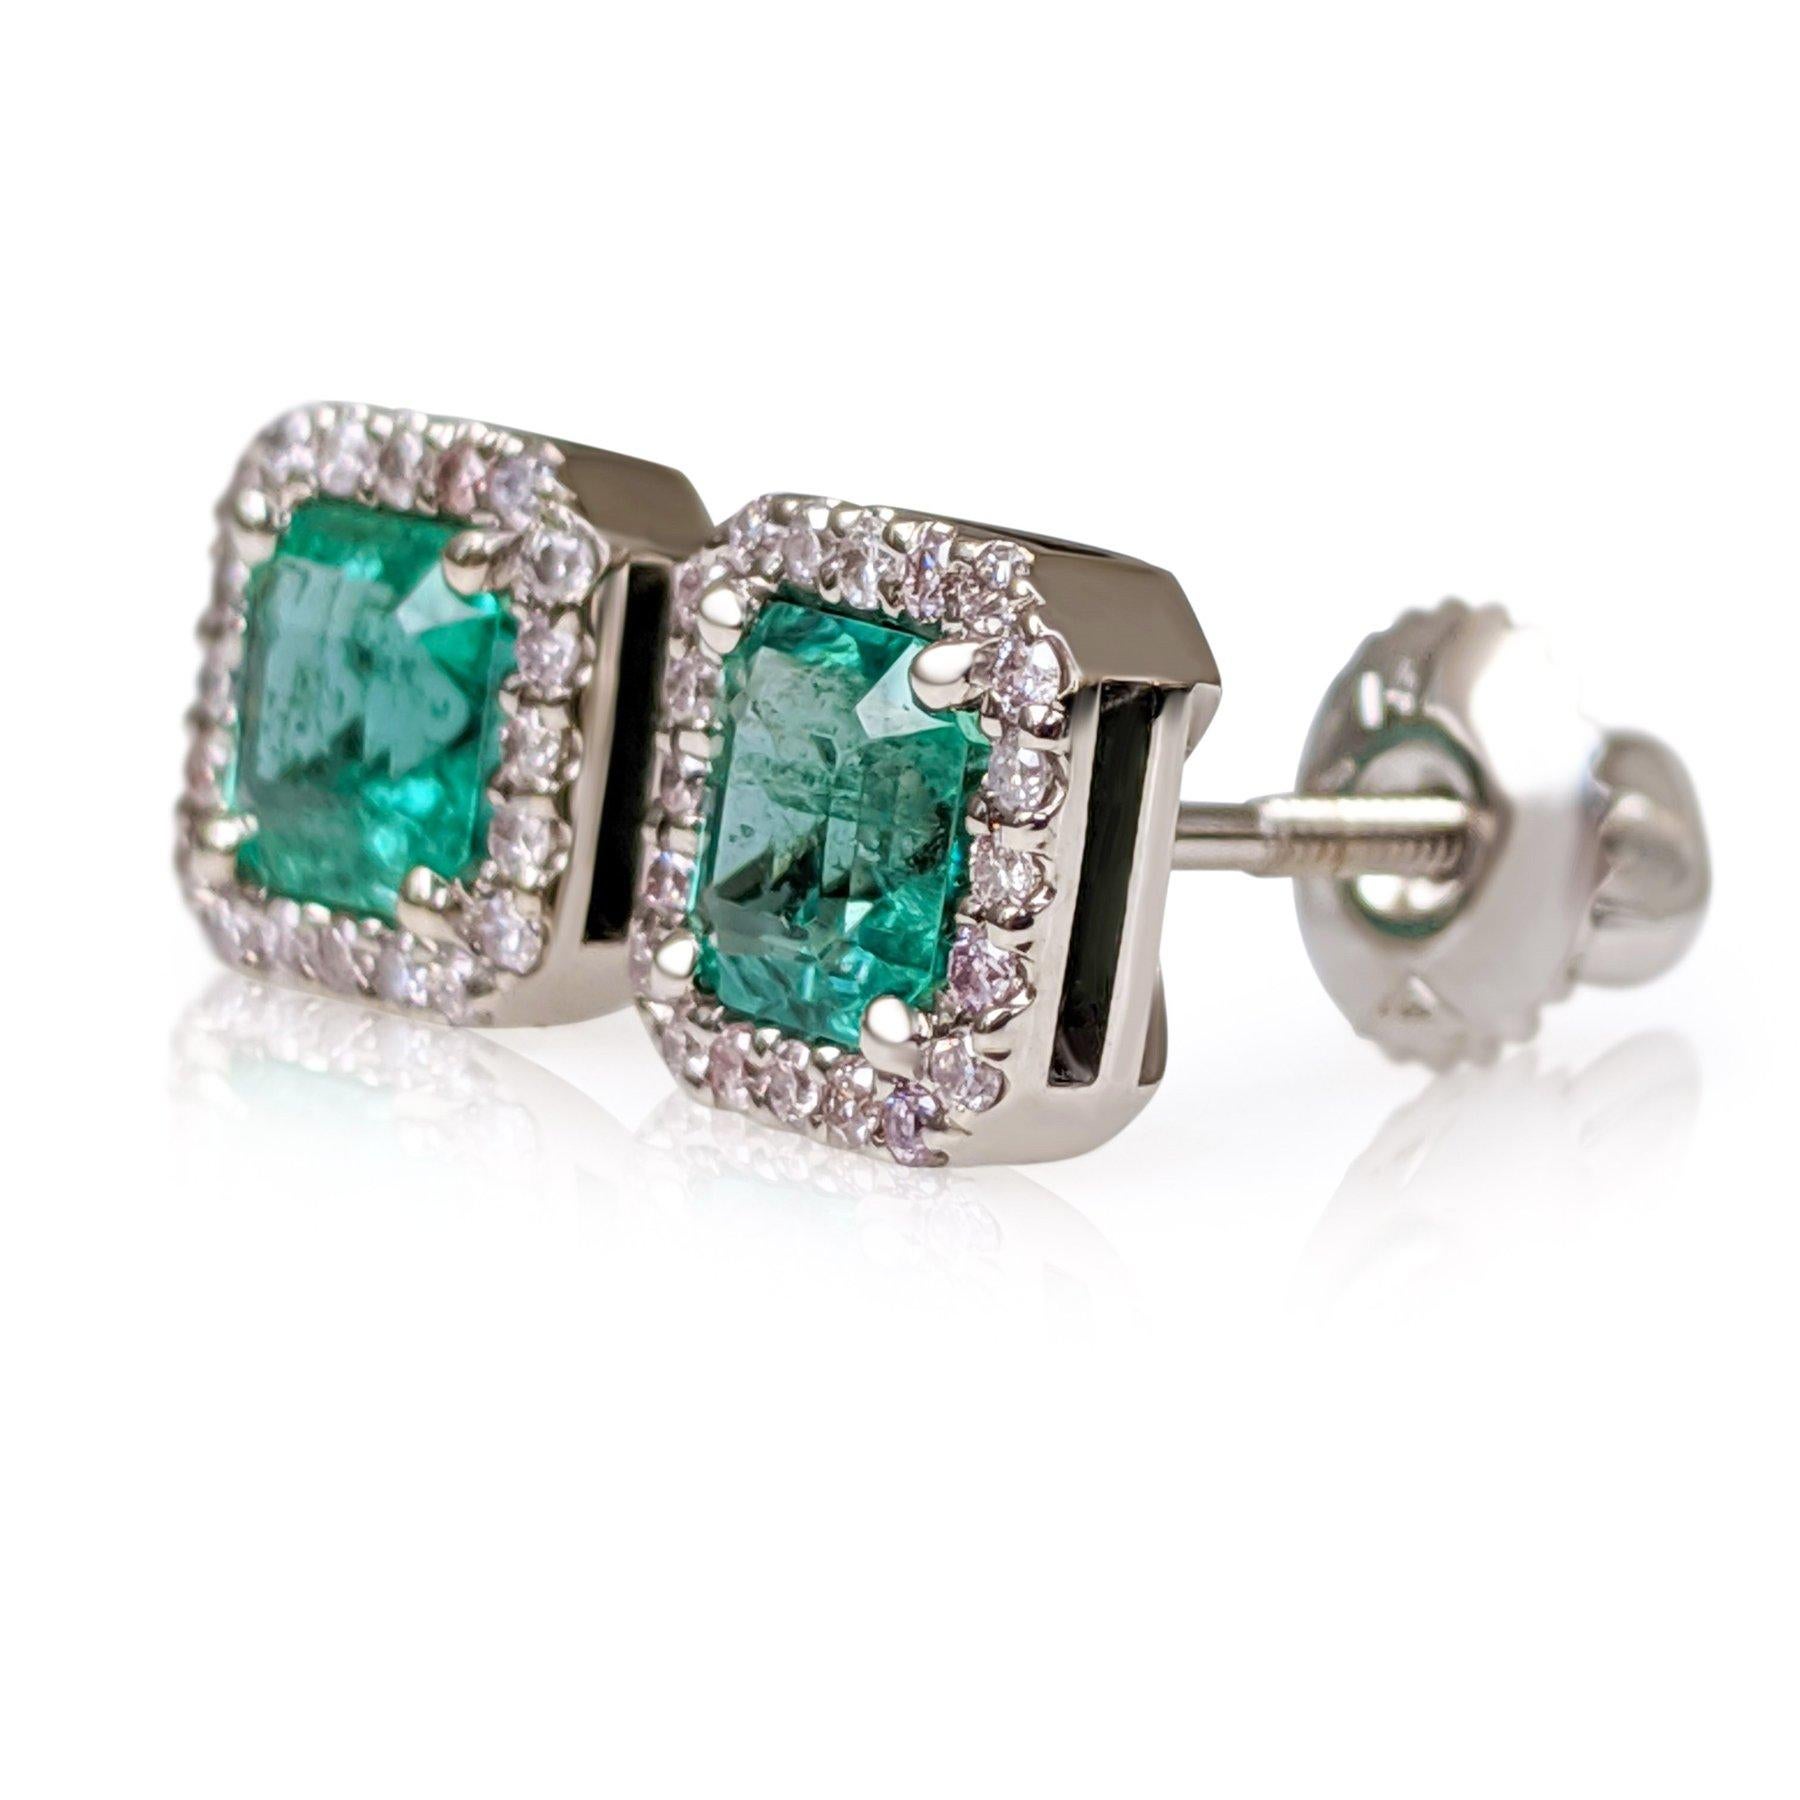 Center Stone:
___________
Natural Emeralds
Cut: Cut Cornered Square Step Cut
Carat: 1.26 tcw / 2 pieces
Color: Green
CE(Oil): Minor

Side Stone:
___________
Natural Diamonds
Cut: Round Brilliant
Weight: 0.20 ctttw
Color: Pink
Clarity: SI2-I1

Size: